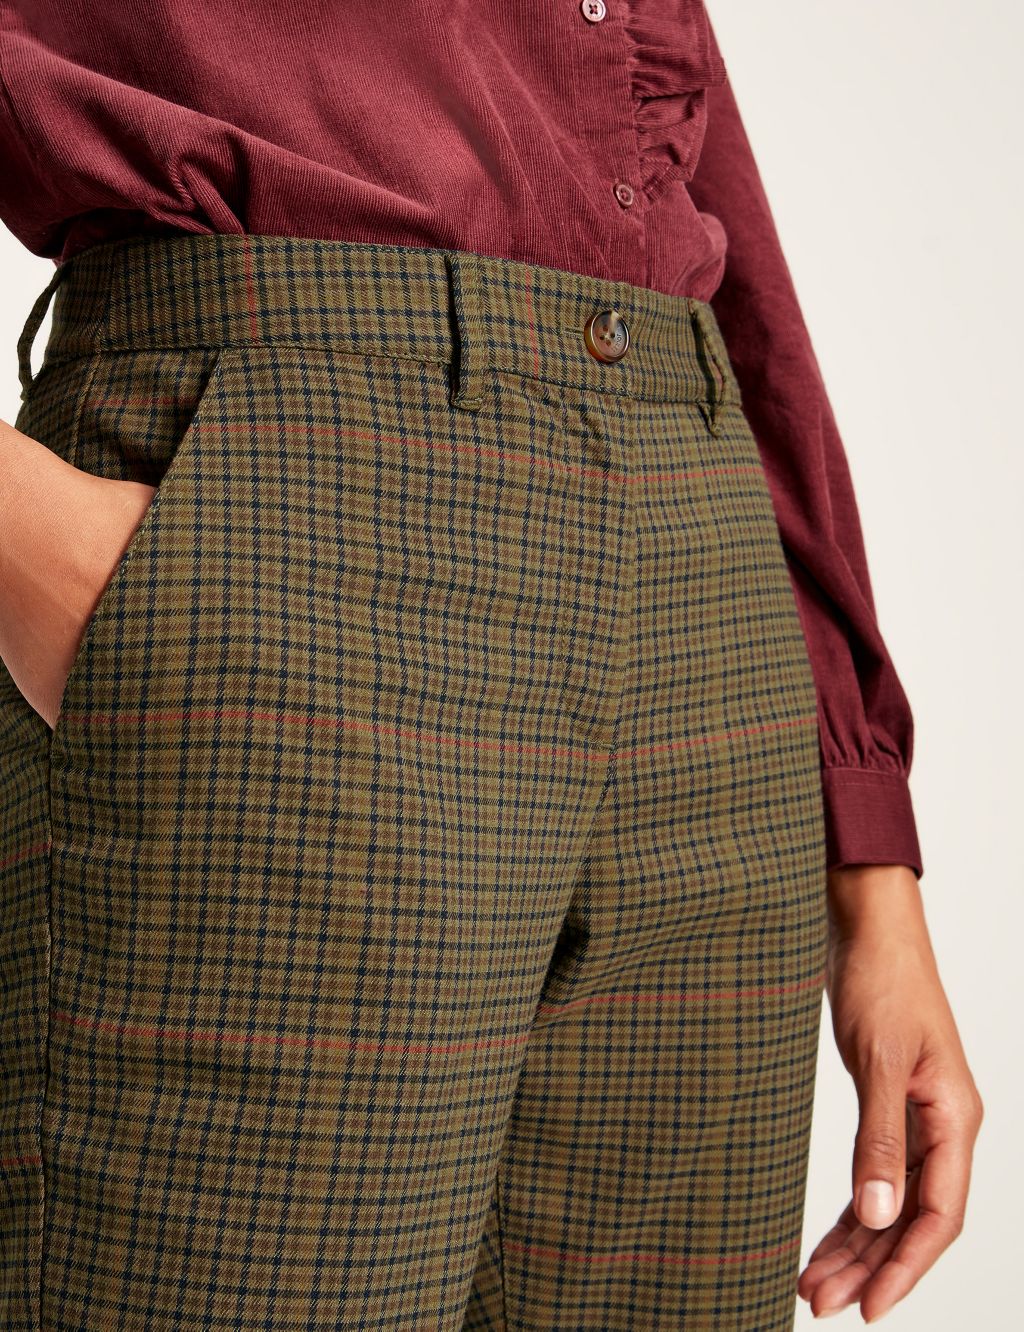 Wool Rich Checked Slim Fit Cropped Trousers image 2